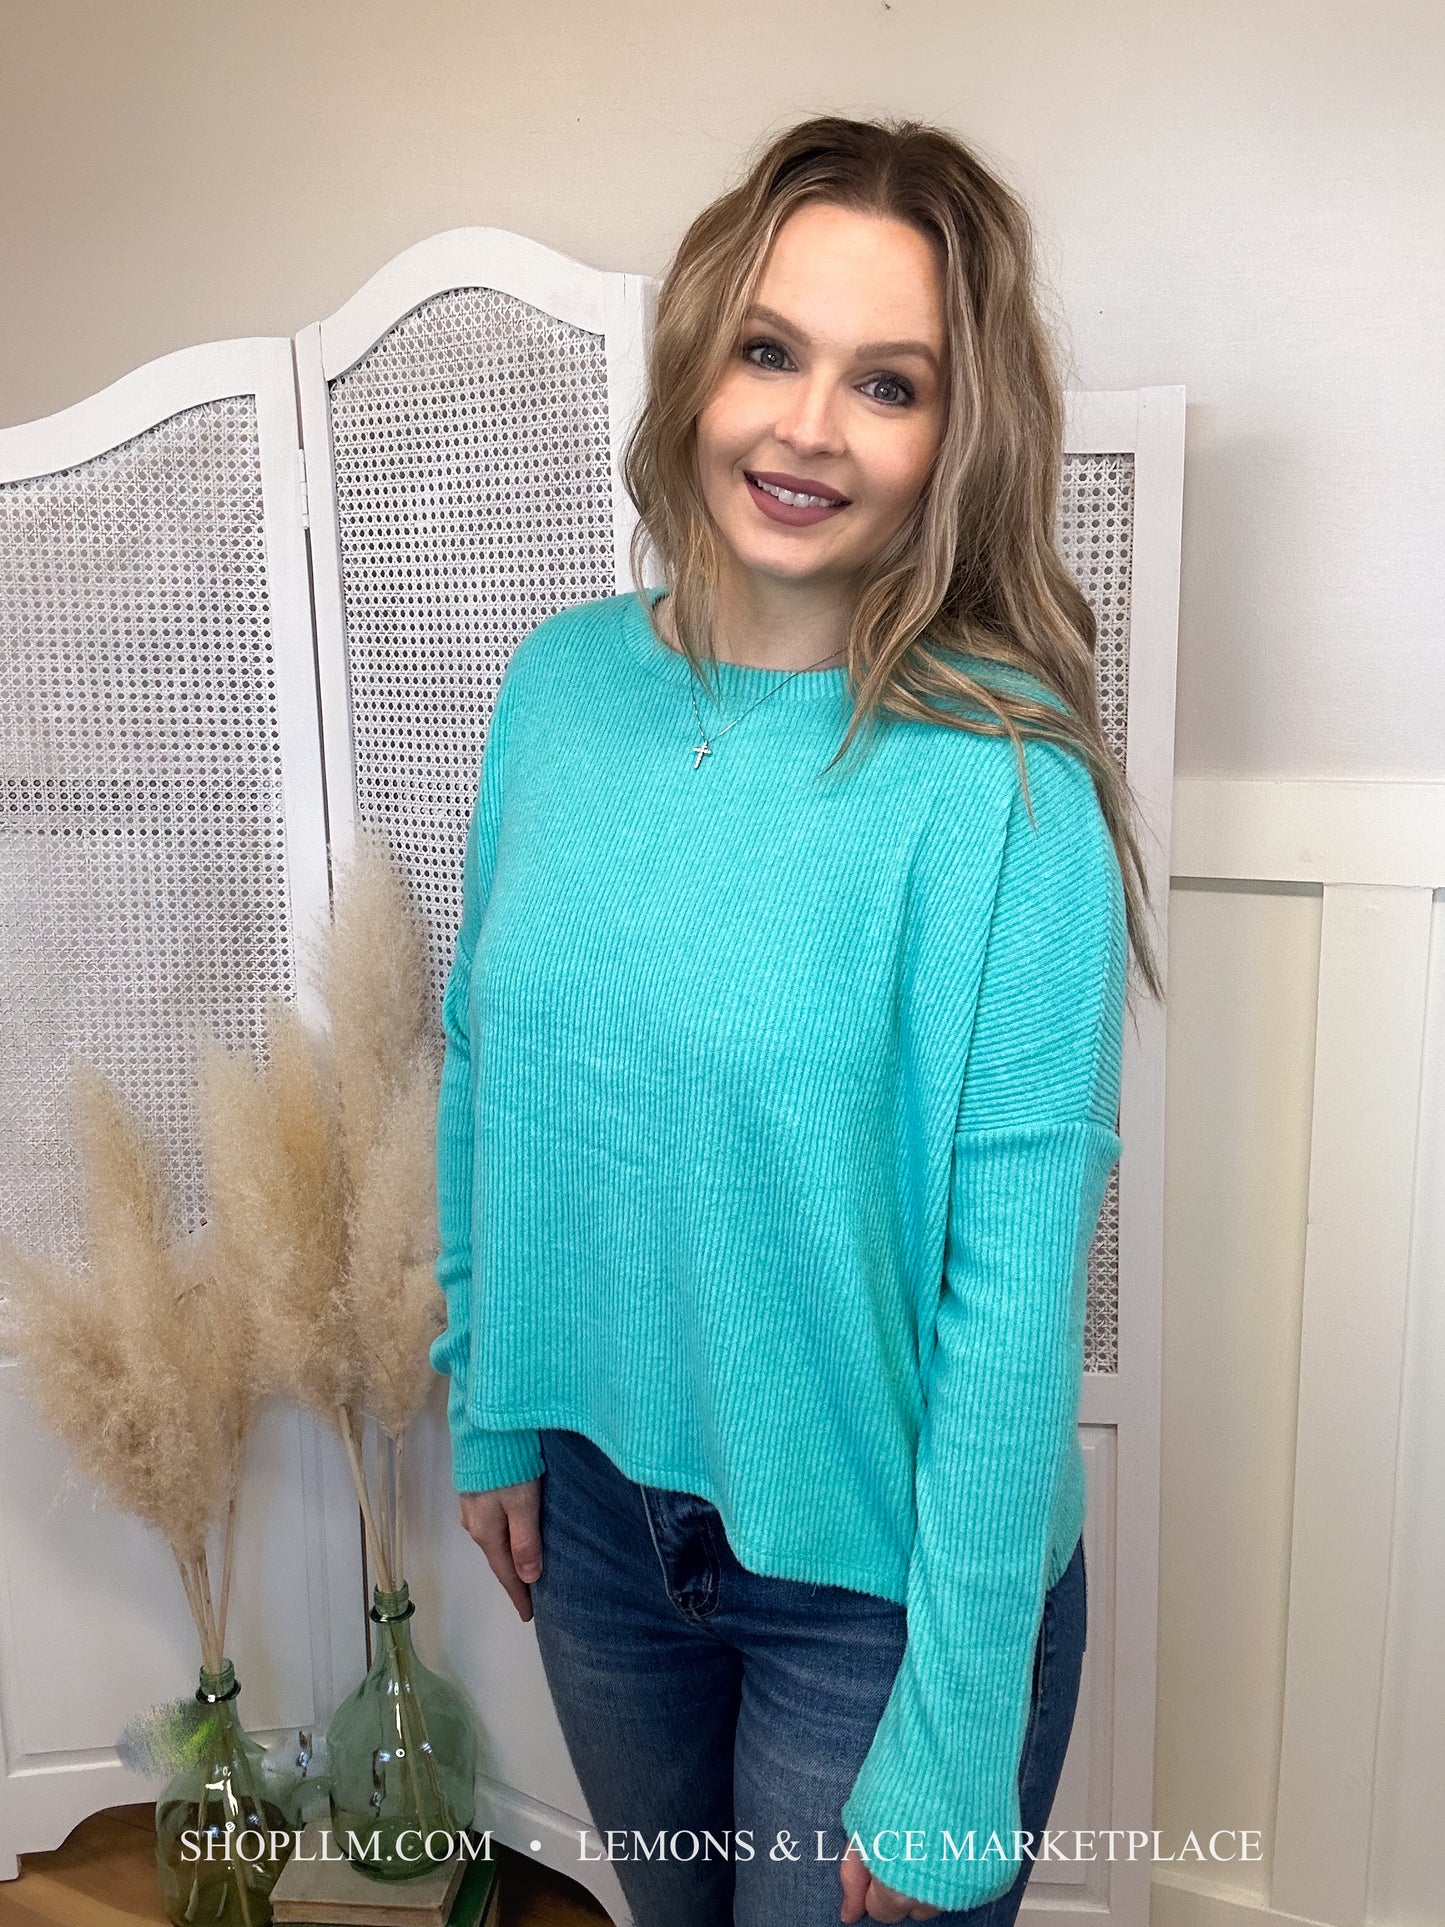 Turquoise Ribbed Dolman Sweater